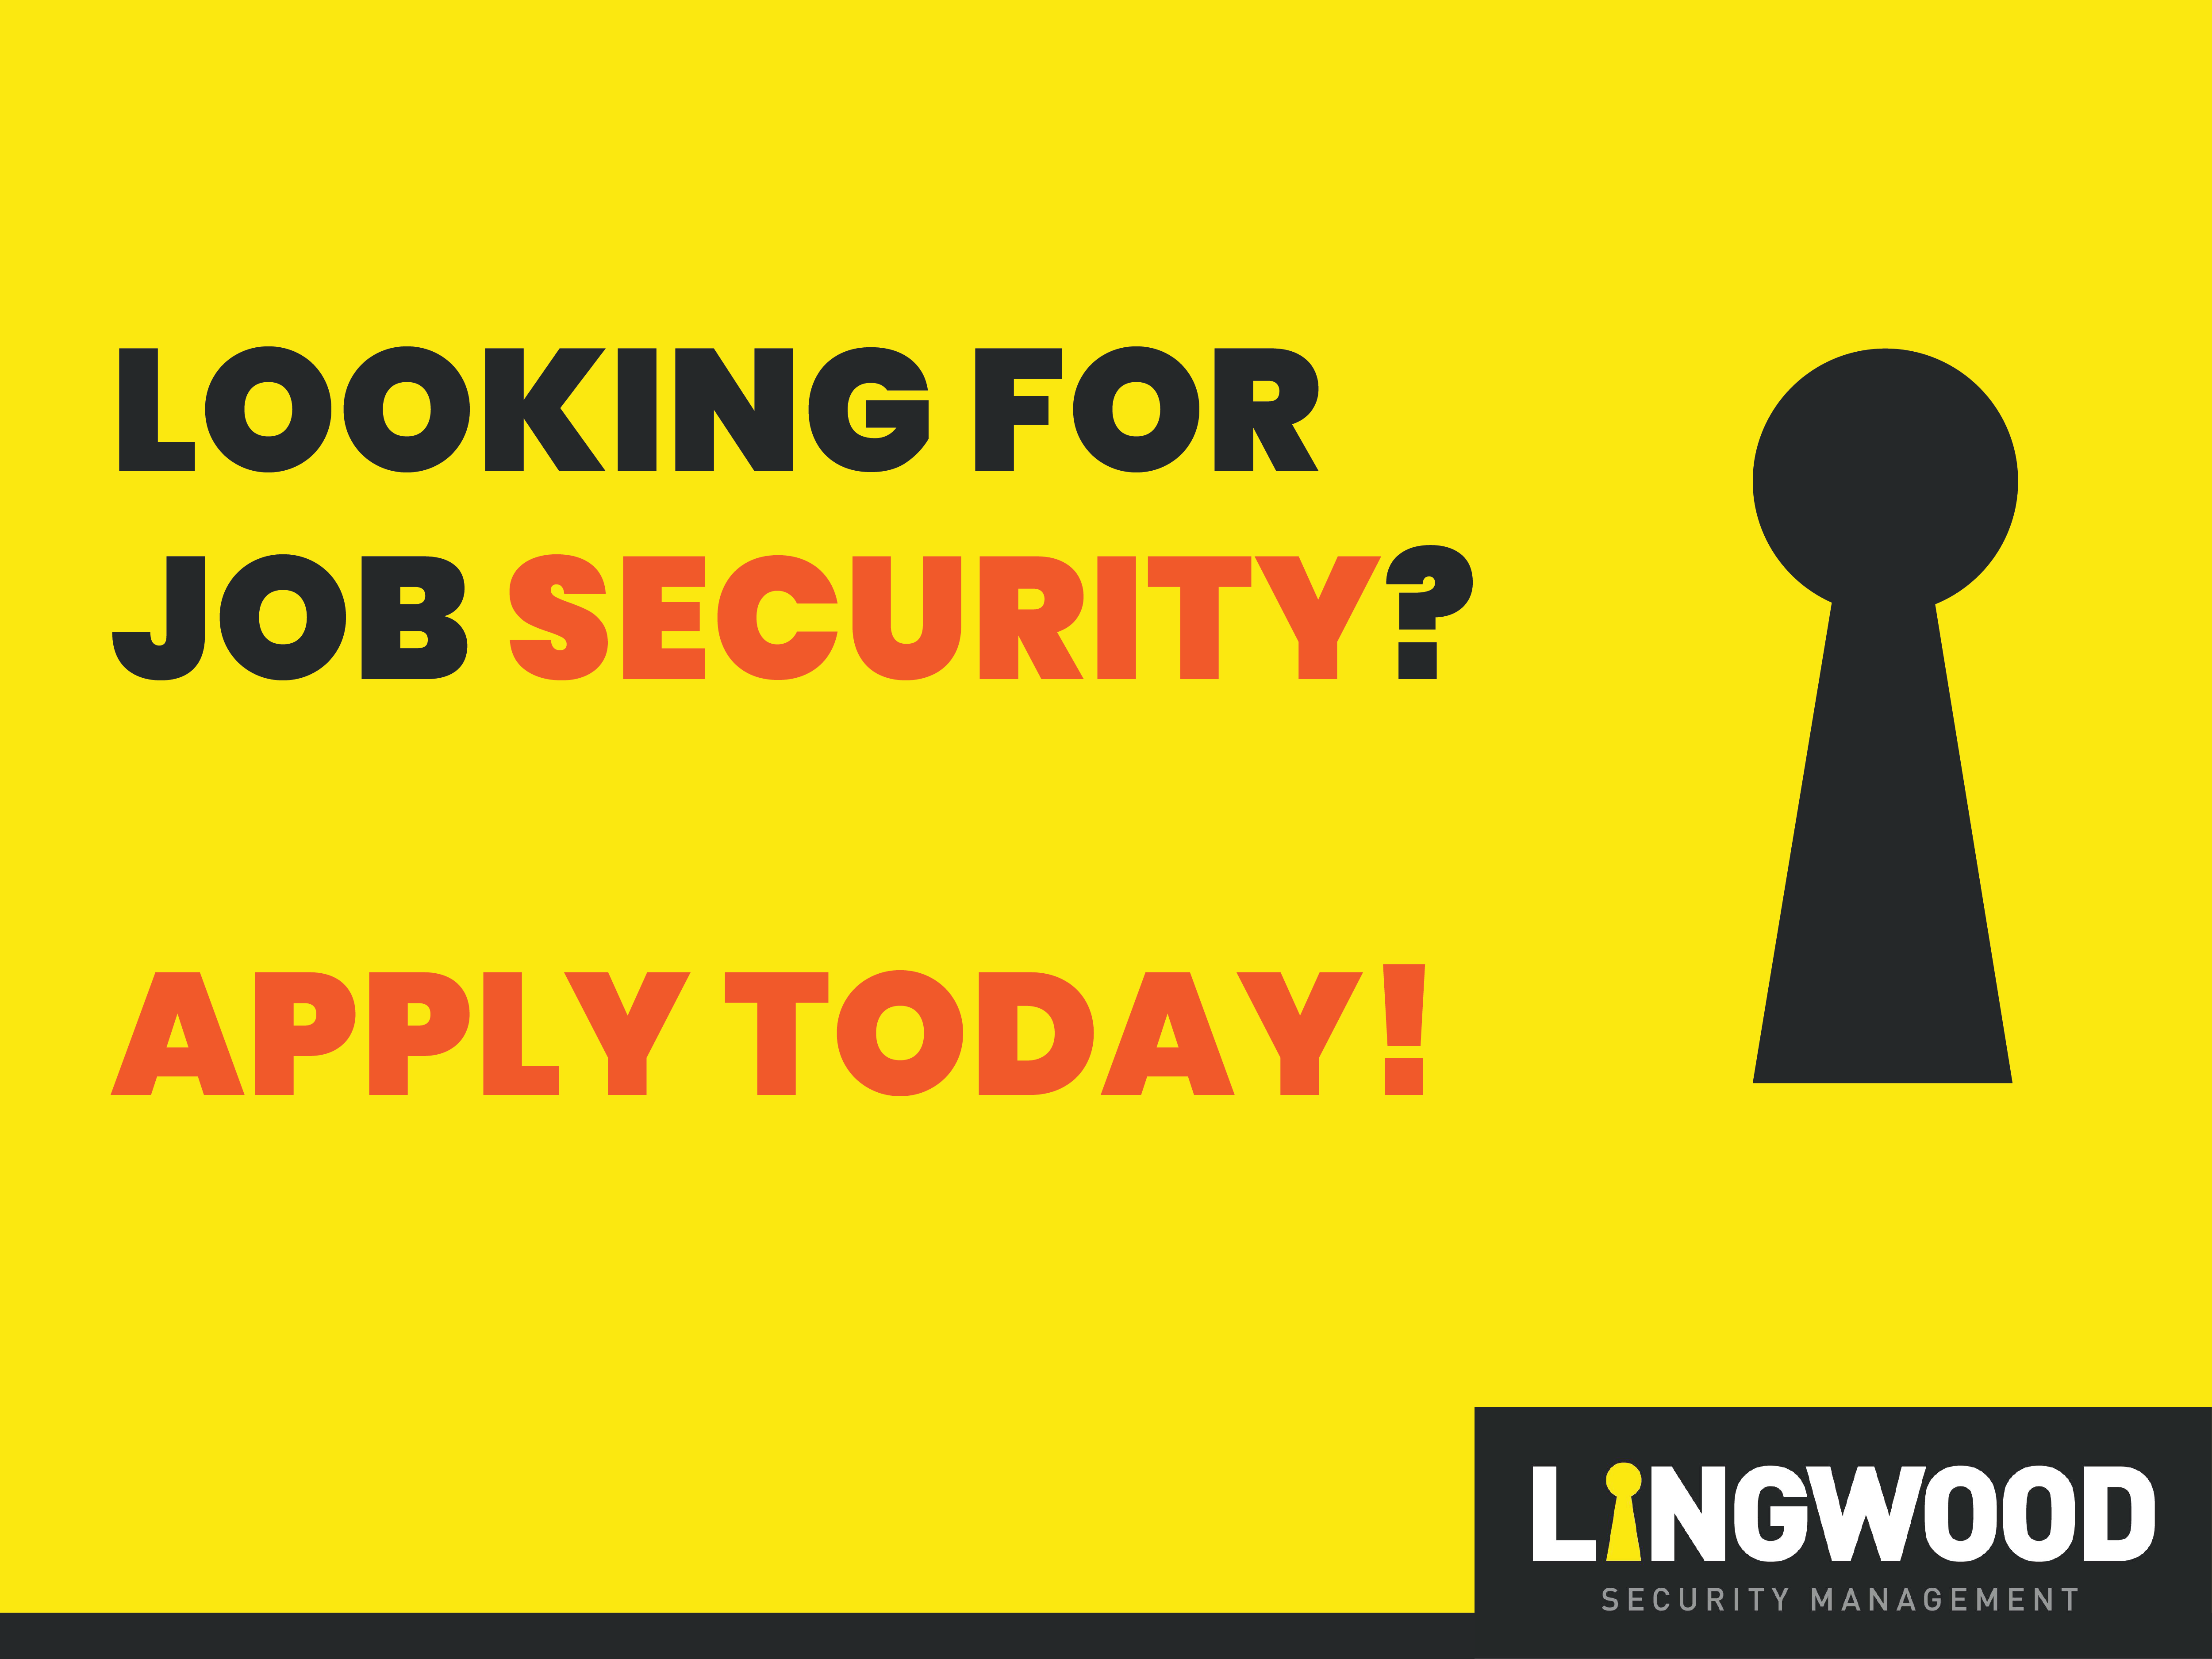 Job opportunities at Lingwood Security